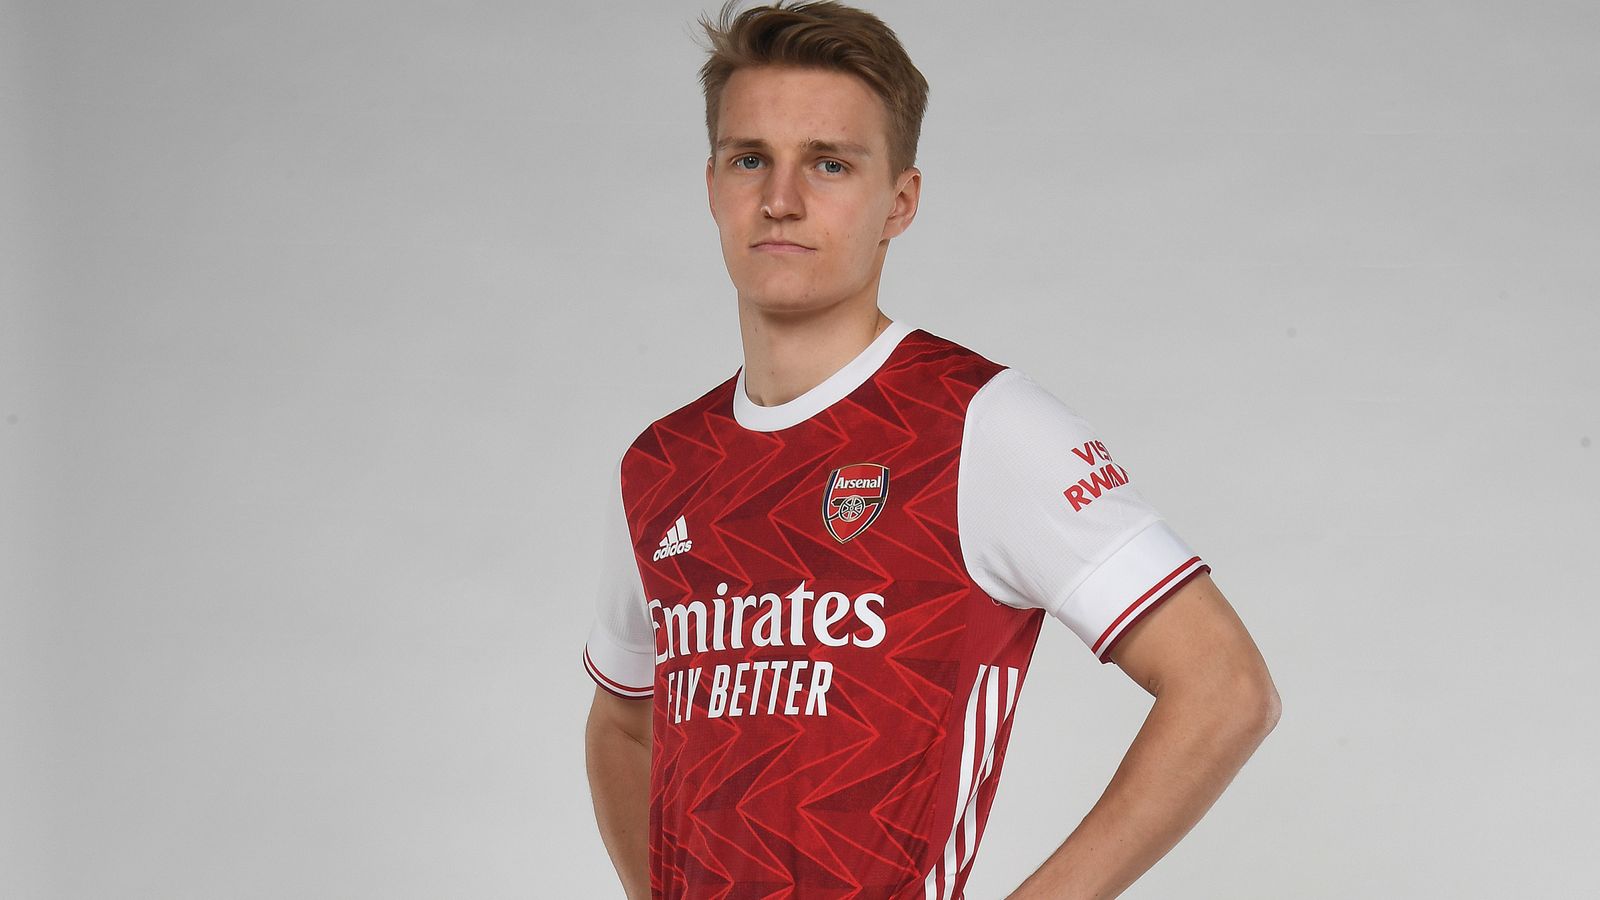 Martin Odegaard transfer: Arsenal sign Real Madrid midfielder on loan until the end of the season